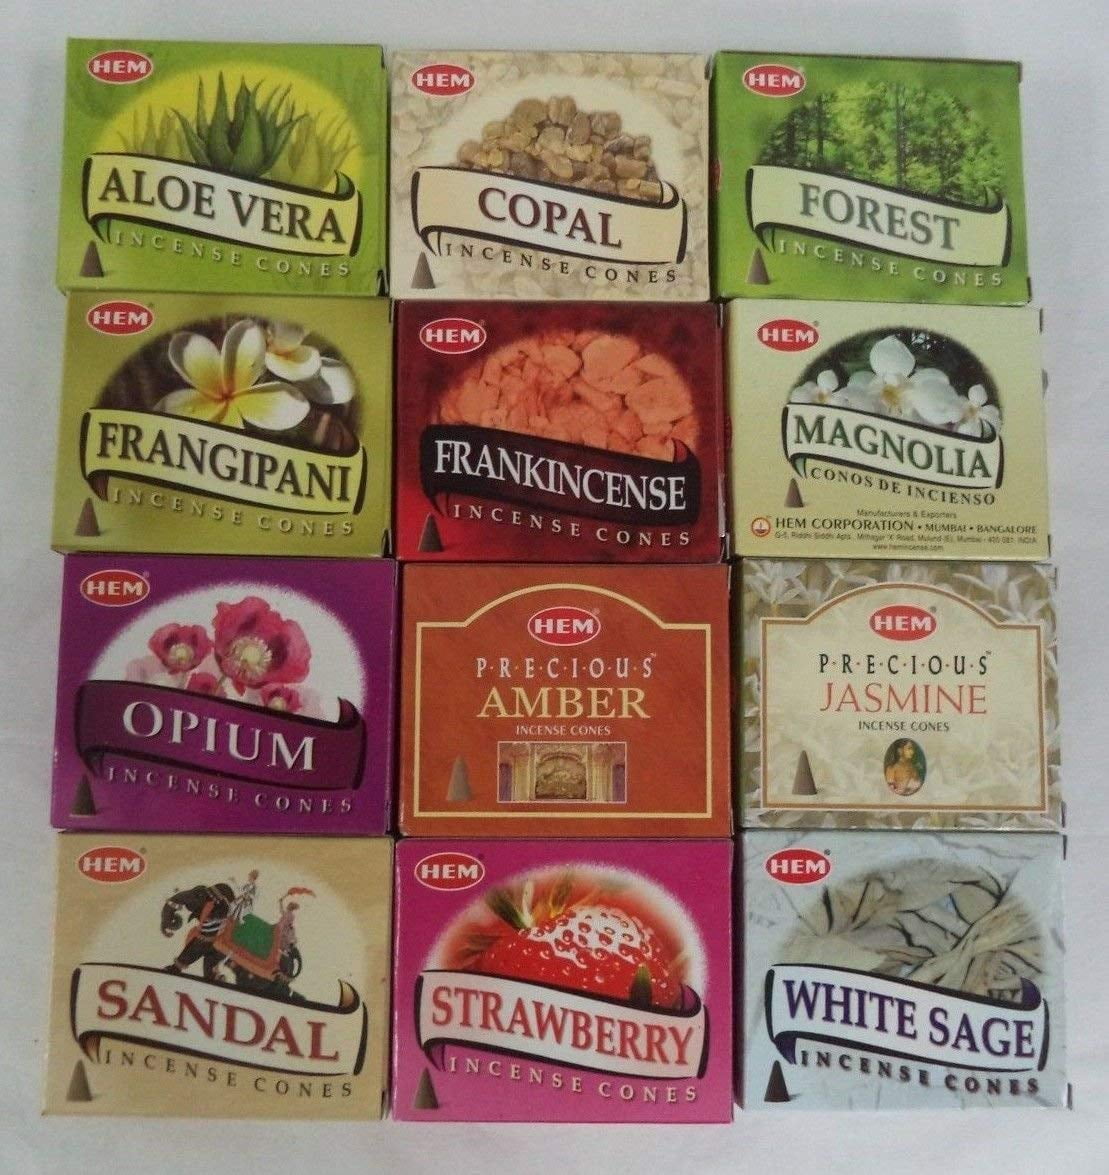 120 Tota... for sale online 12 Assorted Boxes of Hem Incense Cones Best Sellers Set #2 12 X 10 